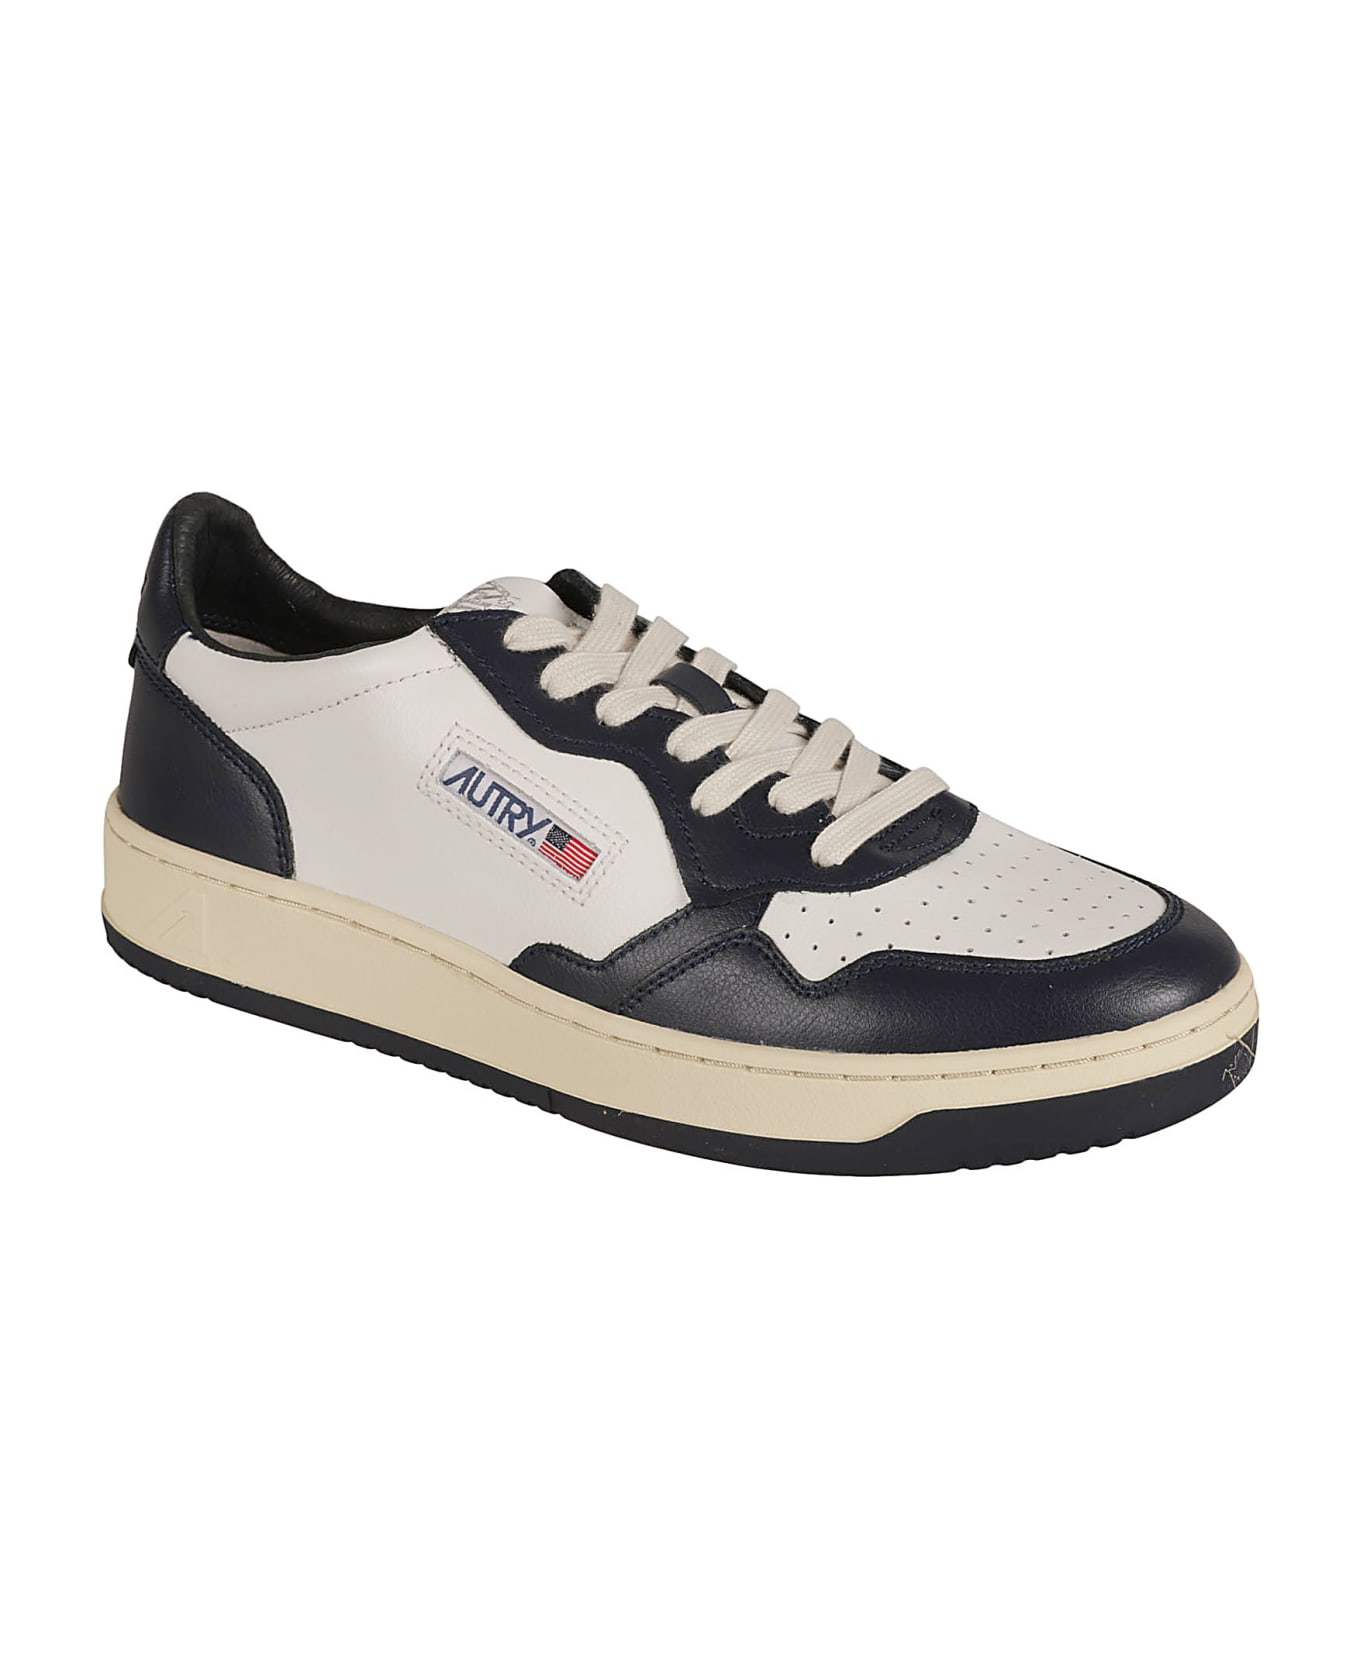 Autry Medalist Low Sneakers - Wht/blue スニーカー